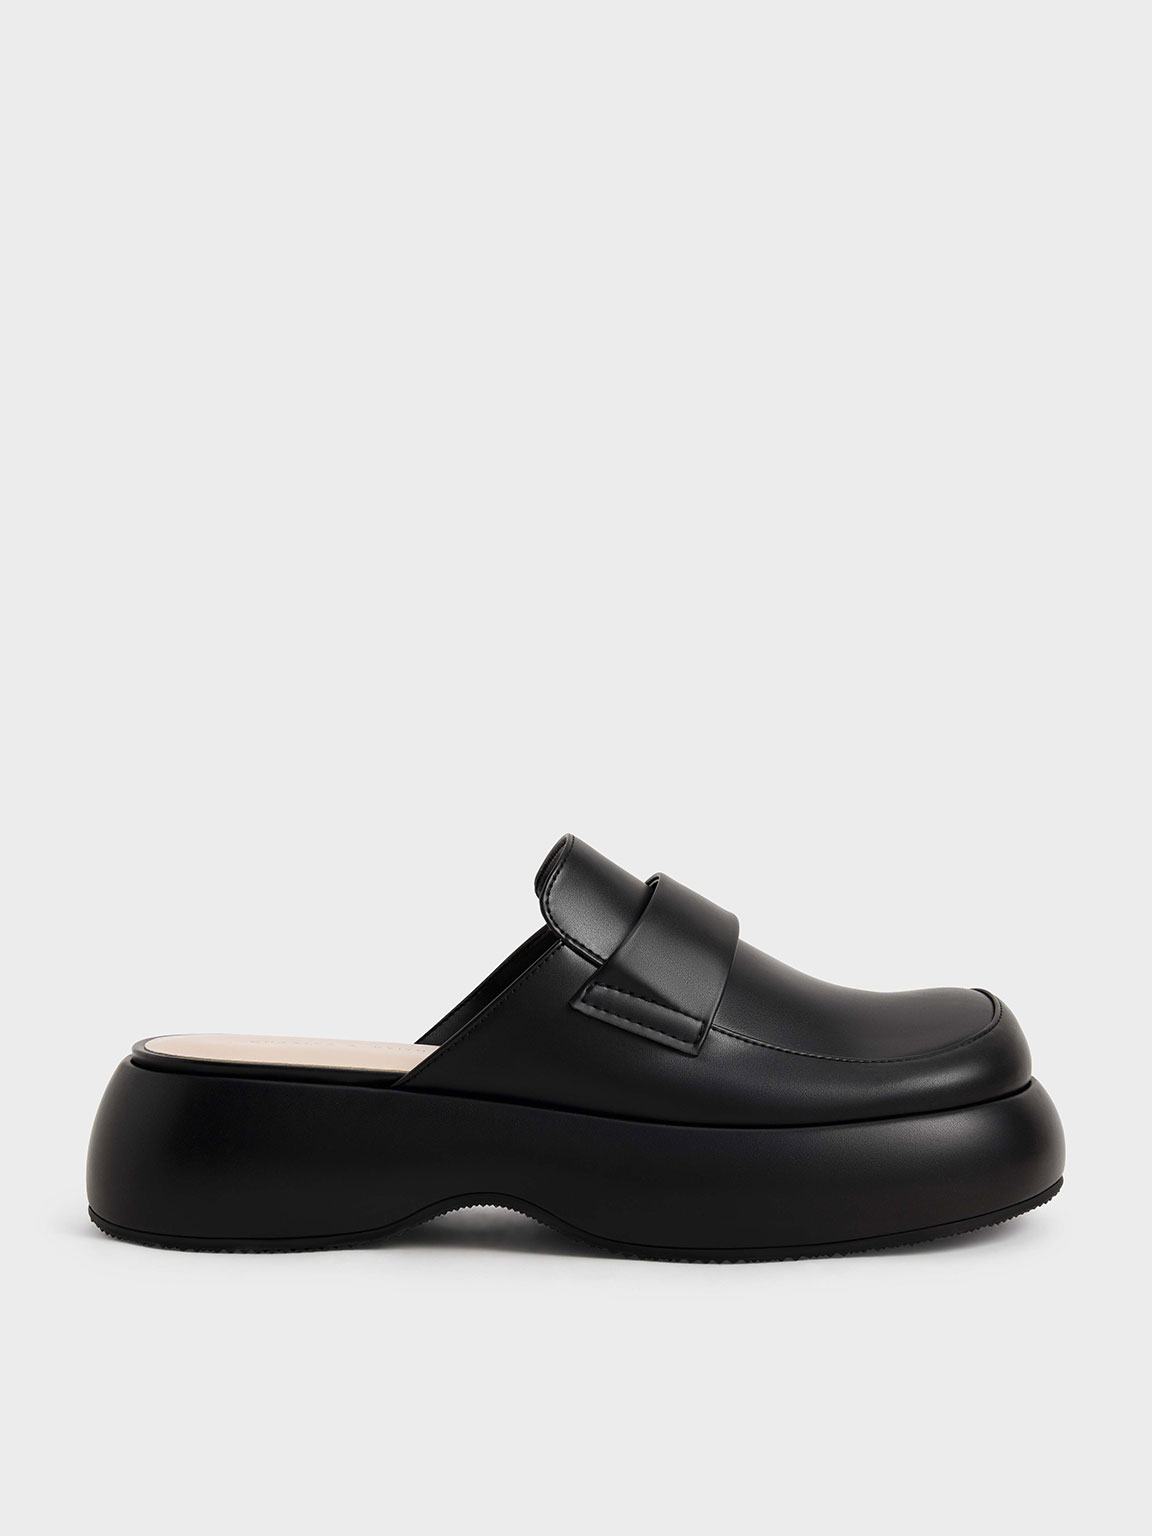 Charles & Keith Rory Platform Penny Loafer Mules In Black | ModeSens